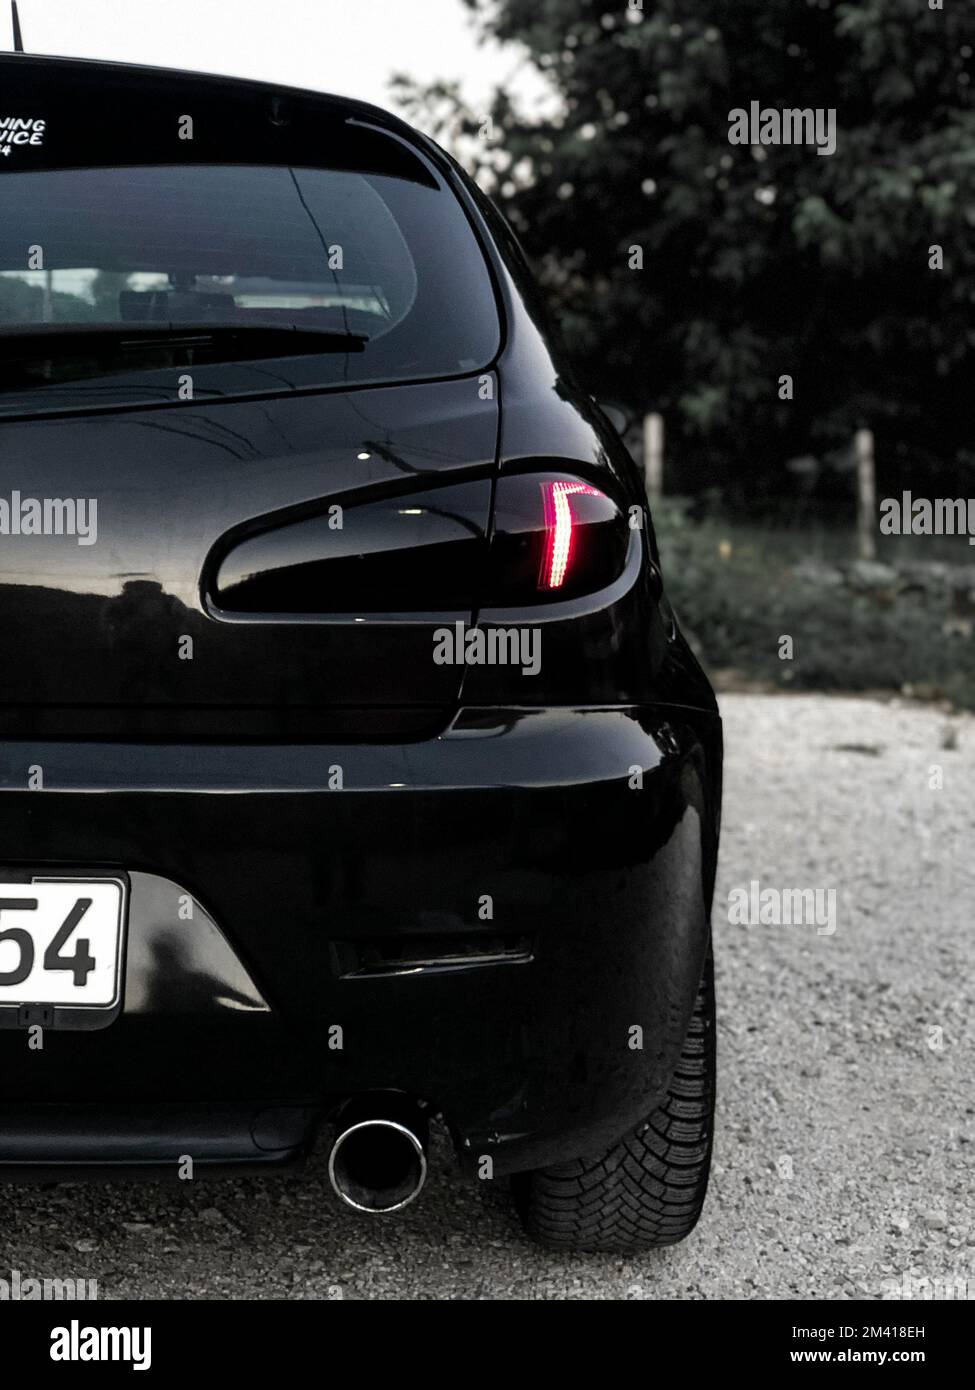 A rear view of a black Alfa Romeo 147 sports car parked outdoors Stock Photo